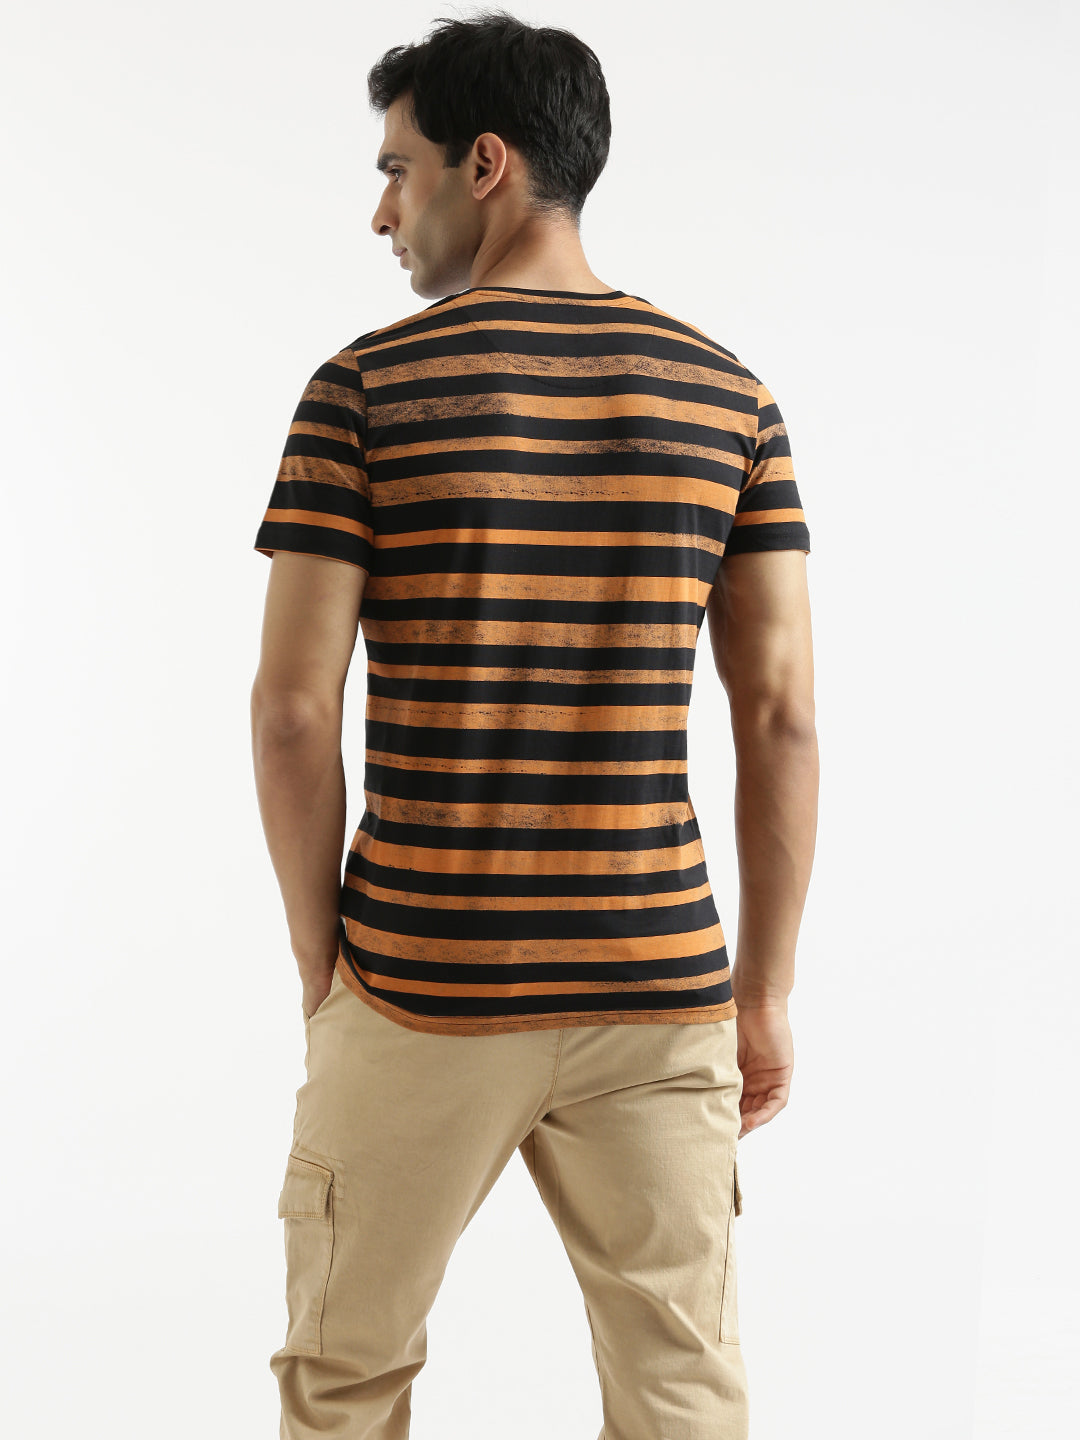 Abstract Striped Orange T-Shirt